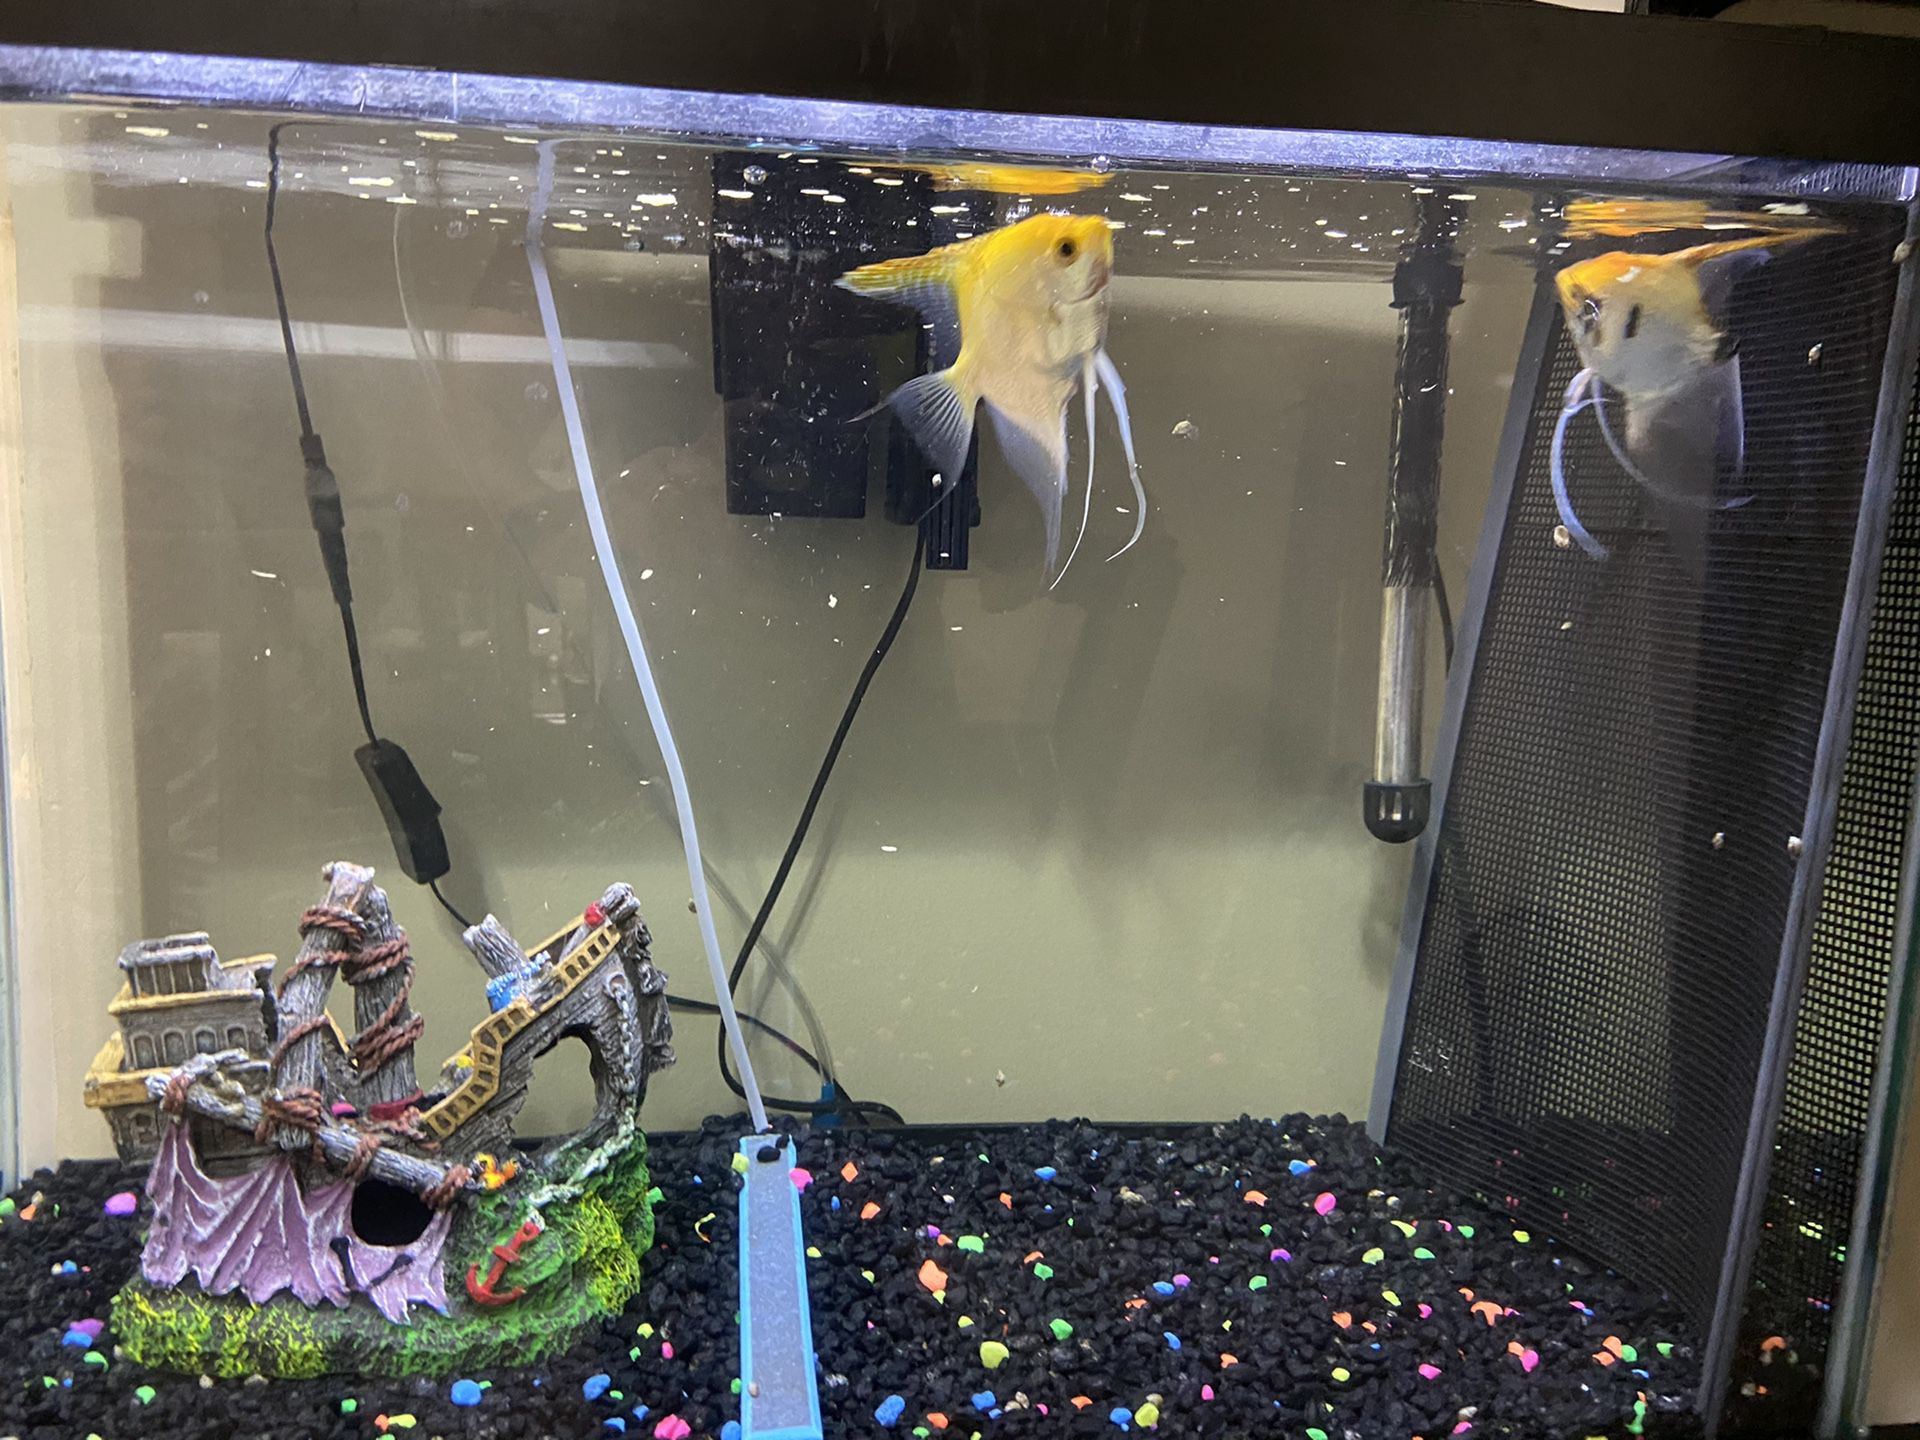 For sale fish tank and angel fish